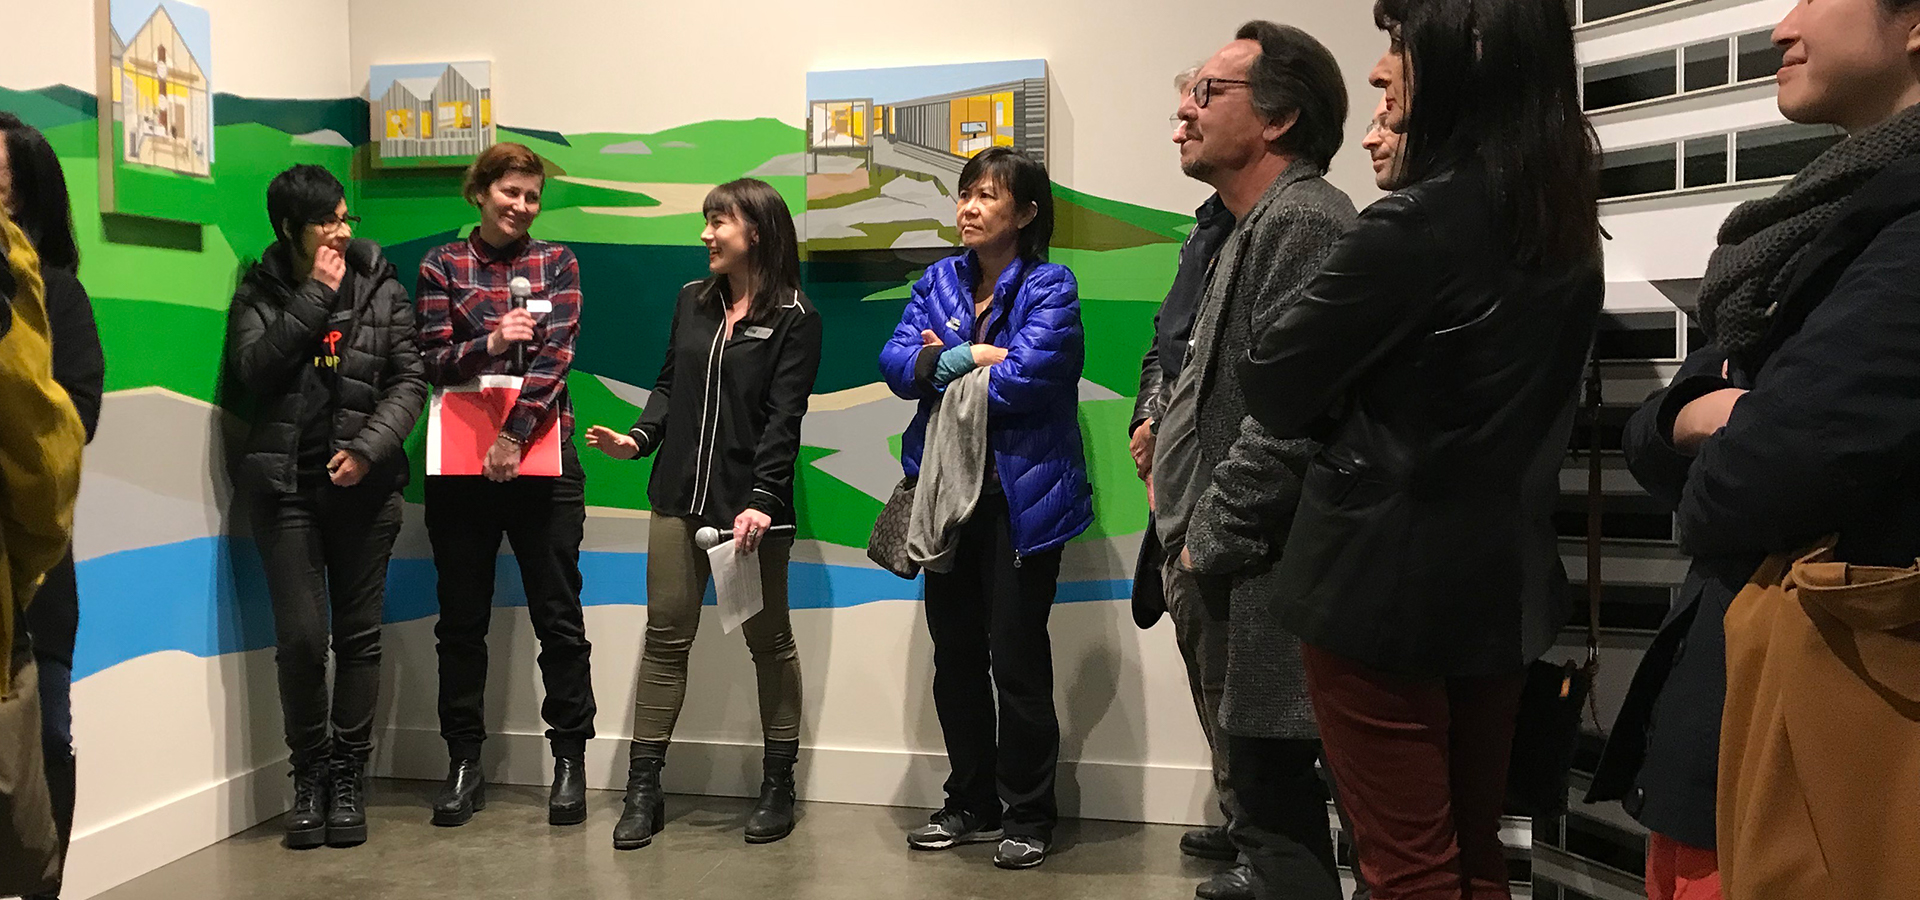 Group of people standing and listening to artist talk